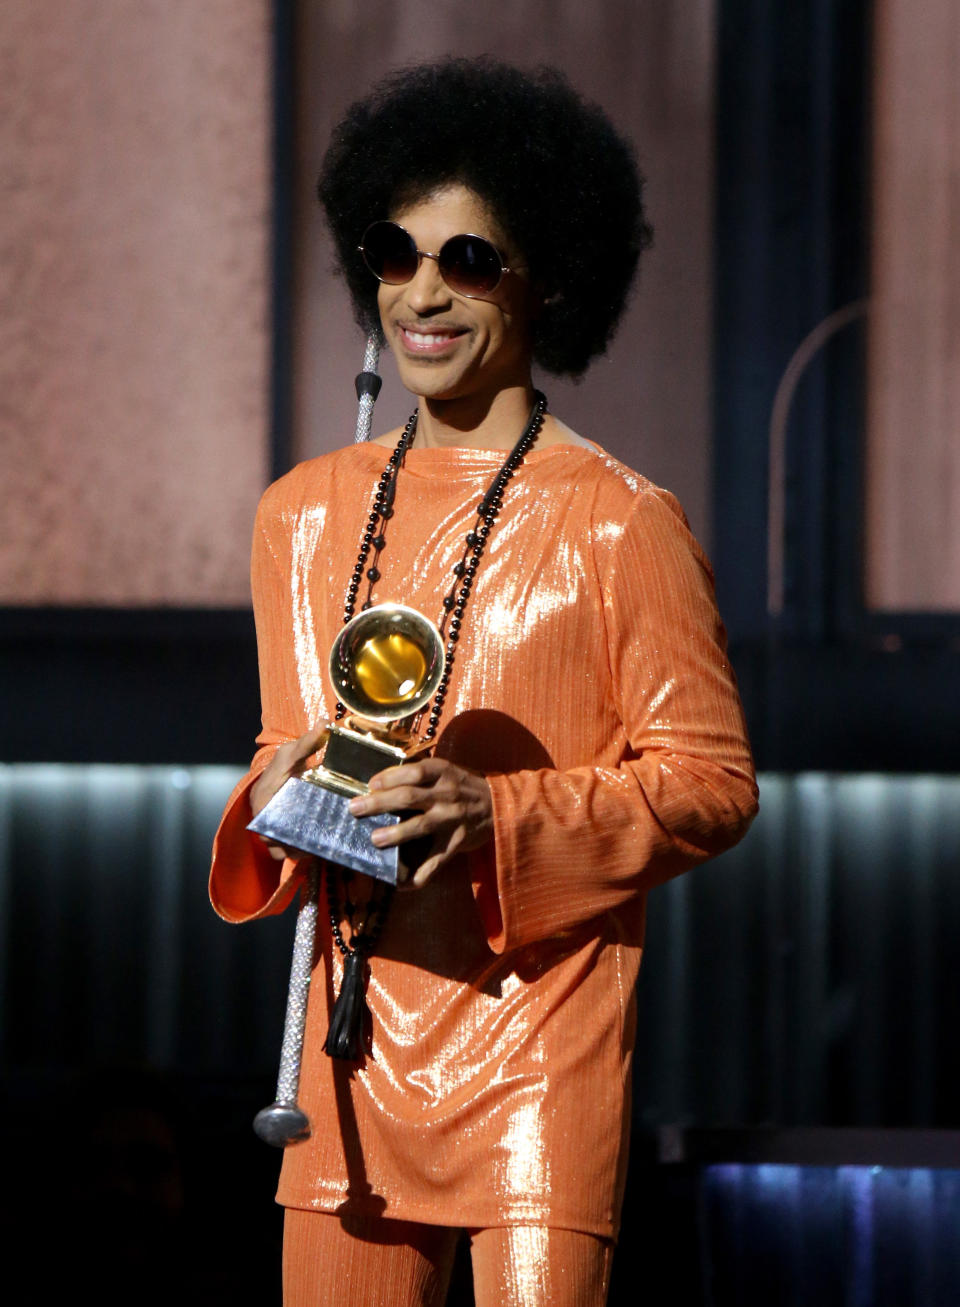 LOS ANGELES, CA - FEBRUARY 08:  Singer/songwriter Prince speaks onstage during The 57th Annual GRAMMY Awards at STAPLES Center on February 8, 2015 in Los Angeles, California.  (Photo by Michael Tran/FilmMagic)